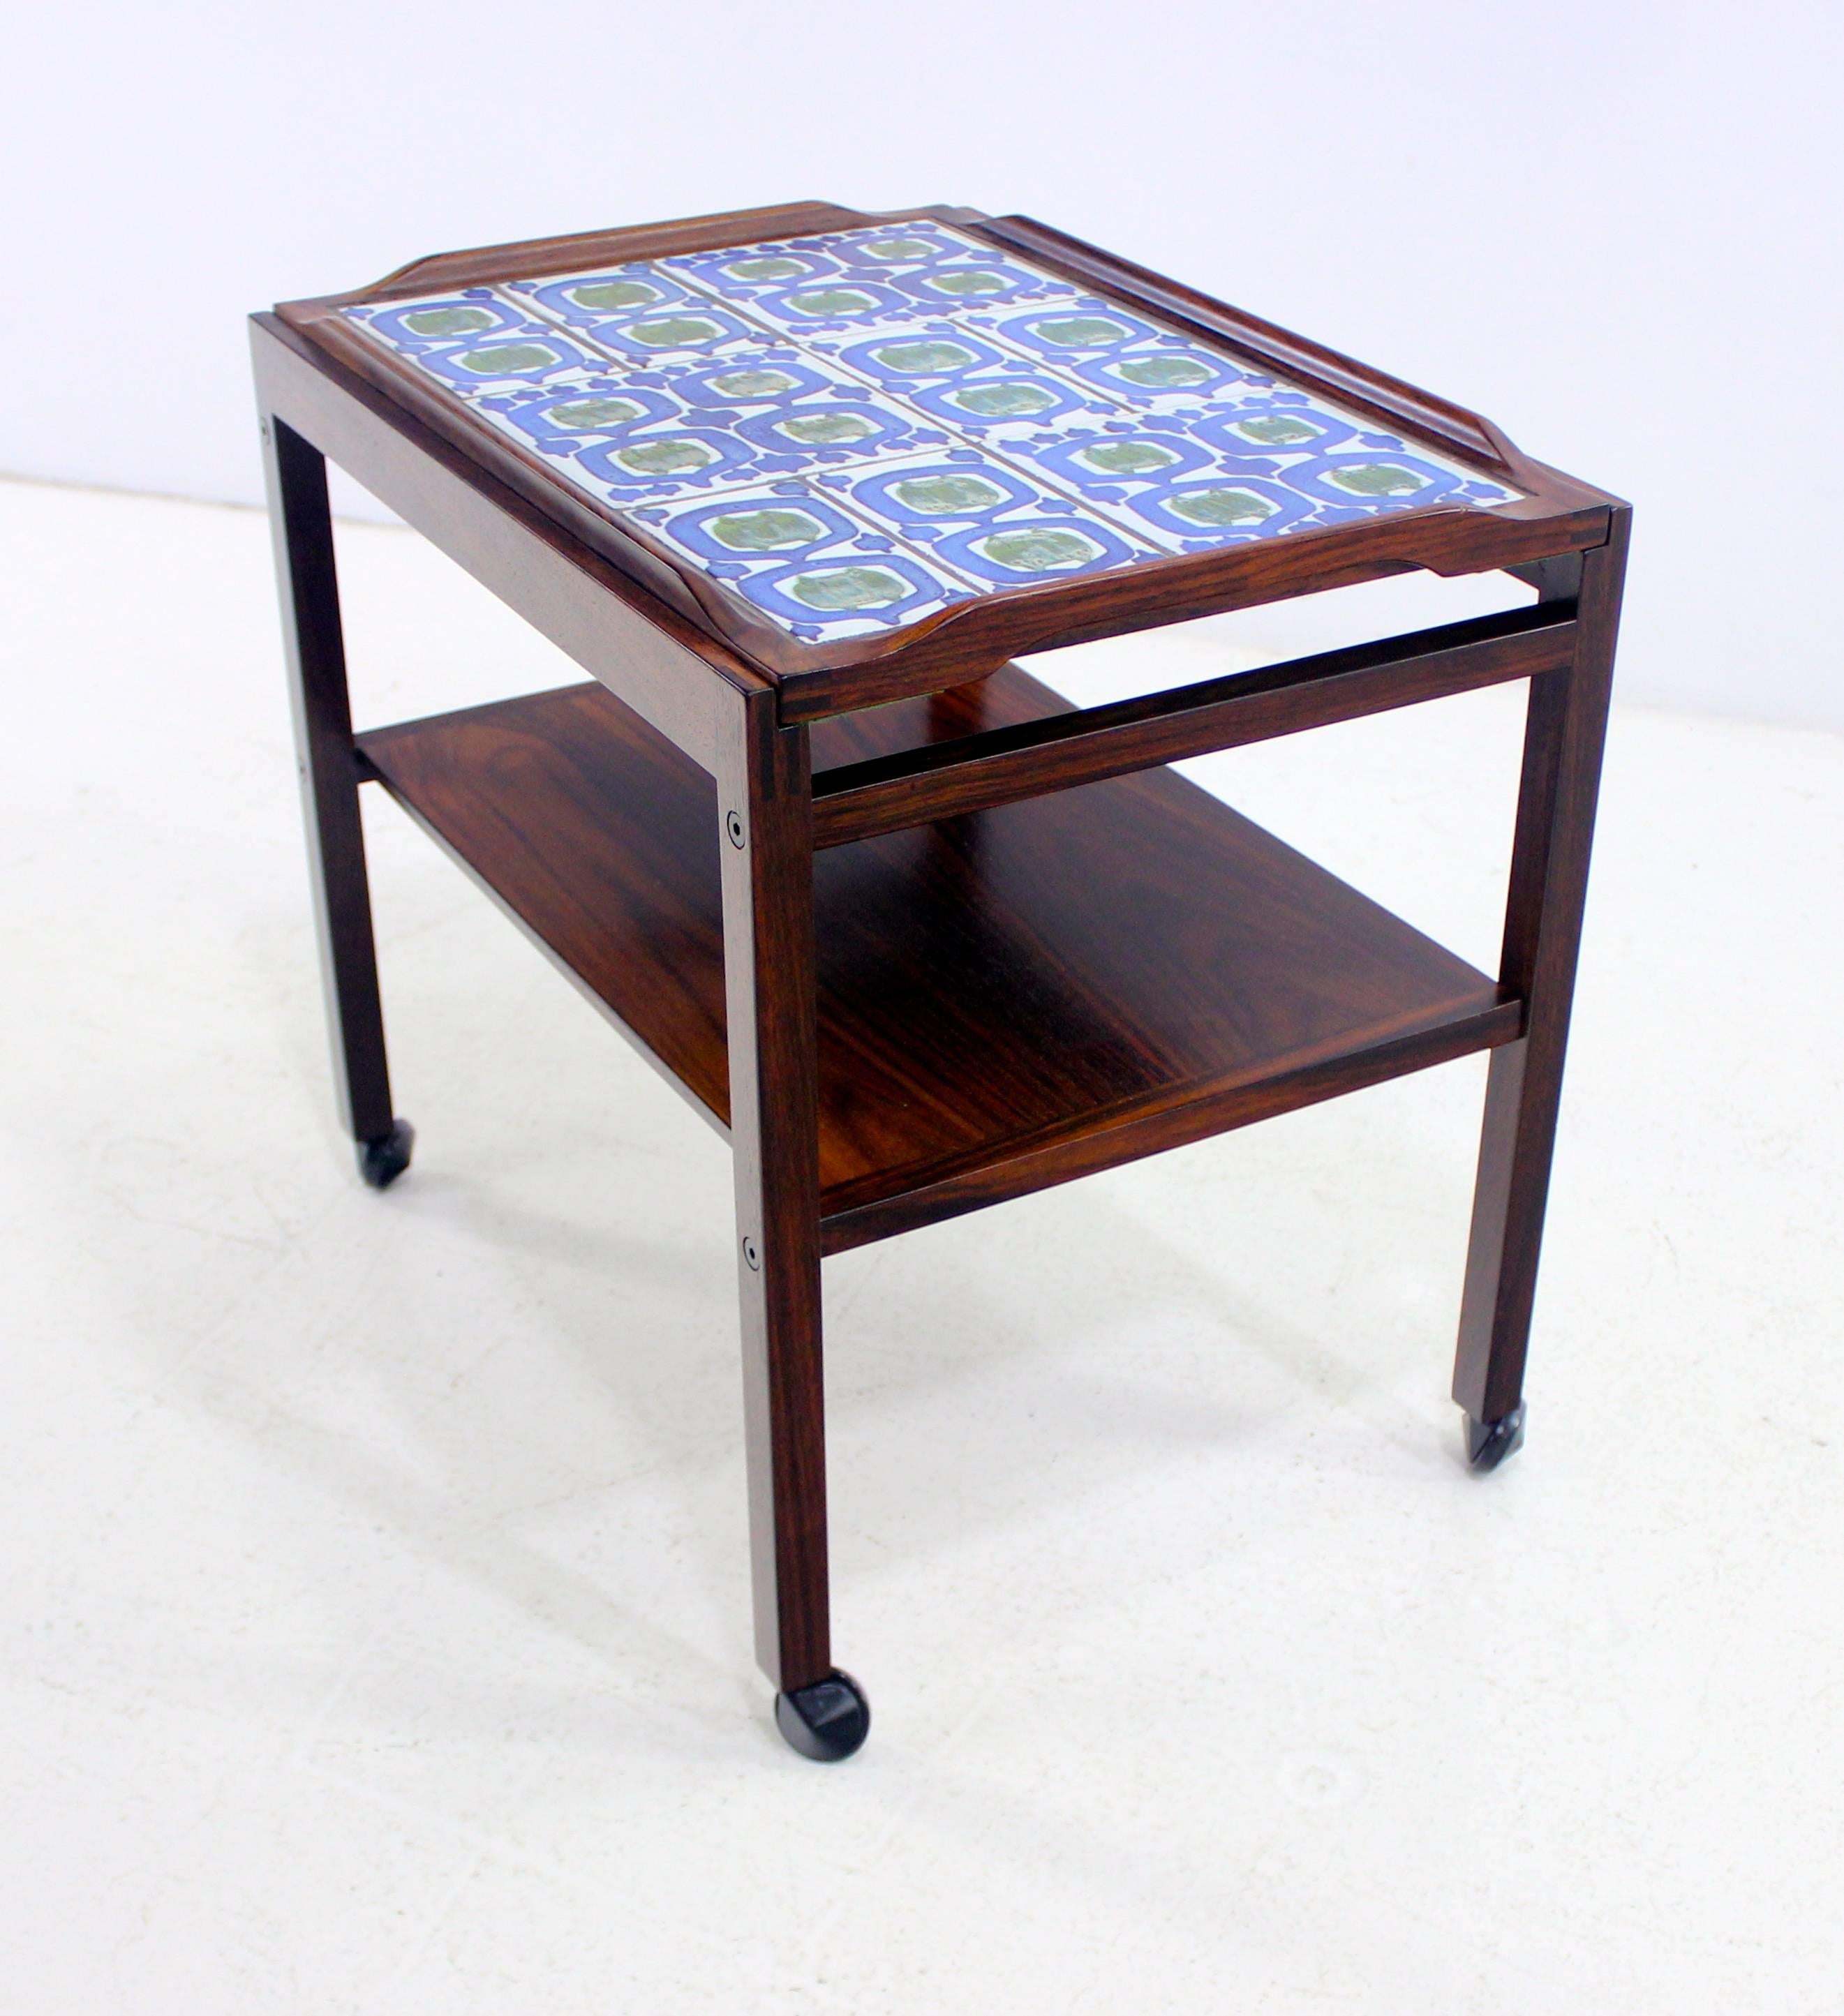 Danish Modern coffee tea cart designed by Severin Hansen Jr.
Haslev Mobelsndkeri, maker, 1973.
Rosewood frame with inlaid tile hand-painted by Grethe Helland Hansen for Royal Copenhagen.
Matching end table and coffee table listed